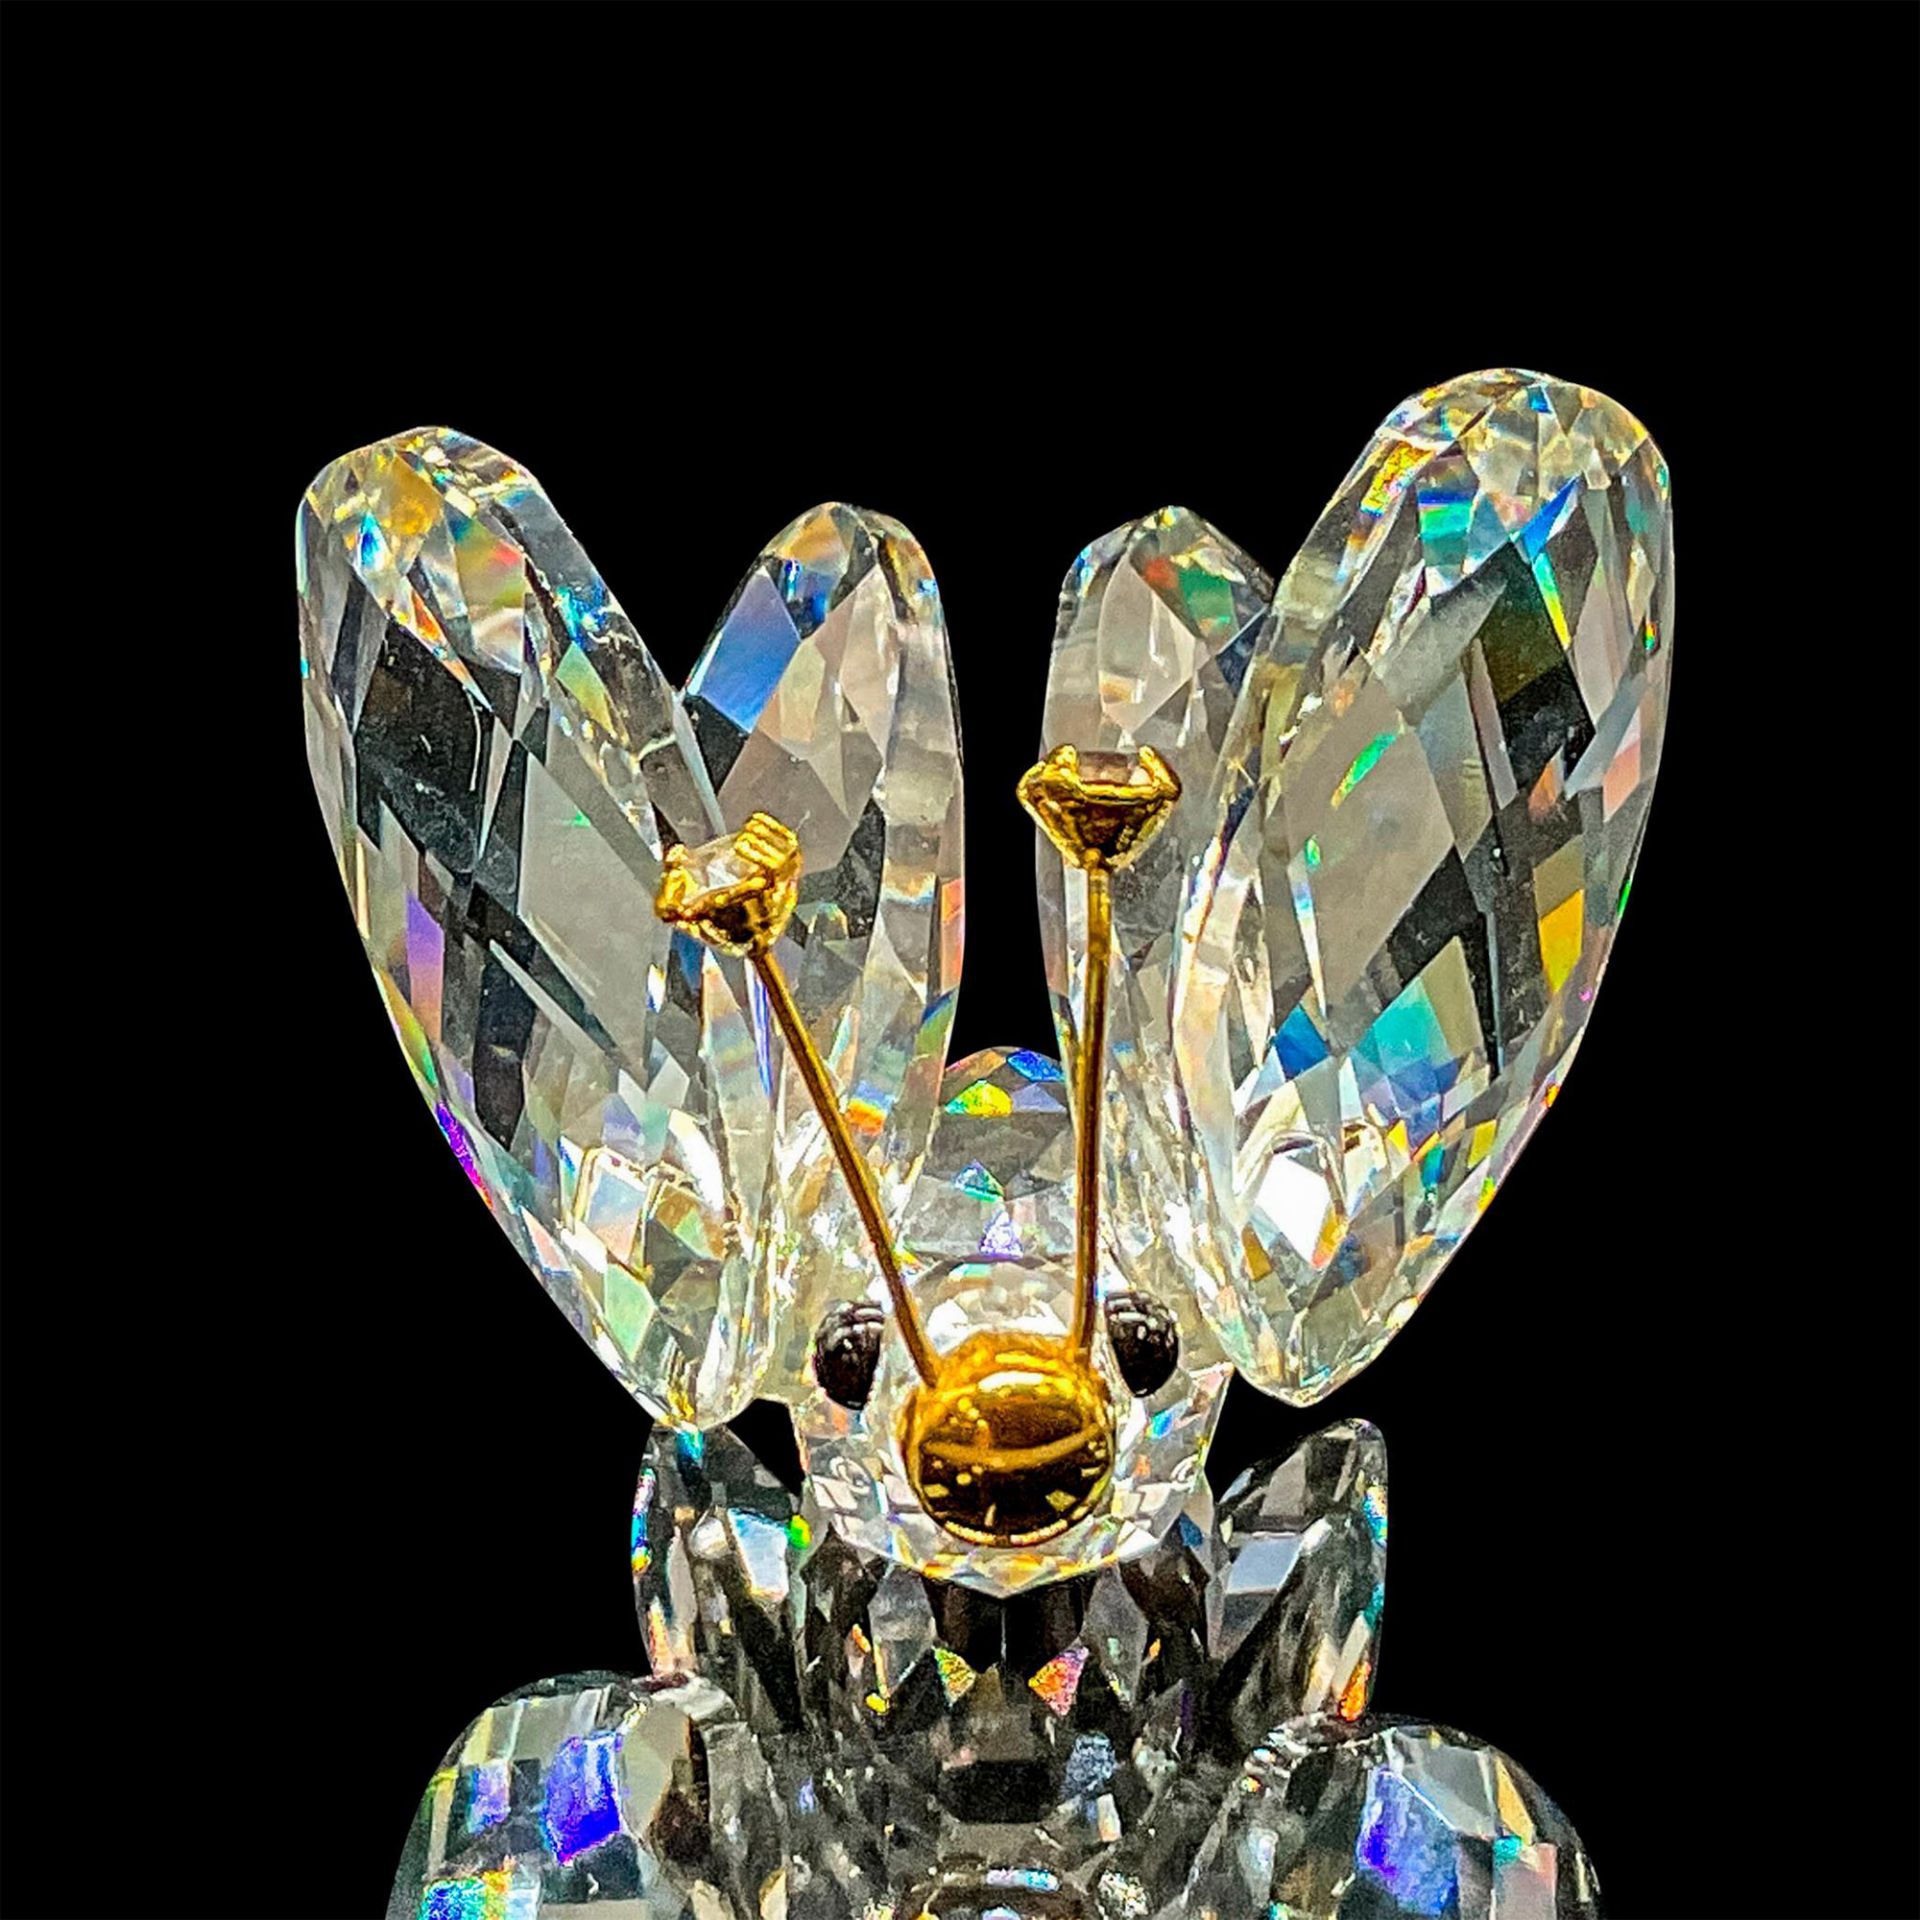 Swarovski Crystal Figurine, Butterfly with Gold Antennae - Image 2 of 5